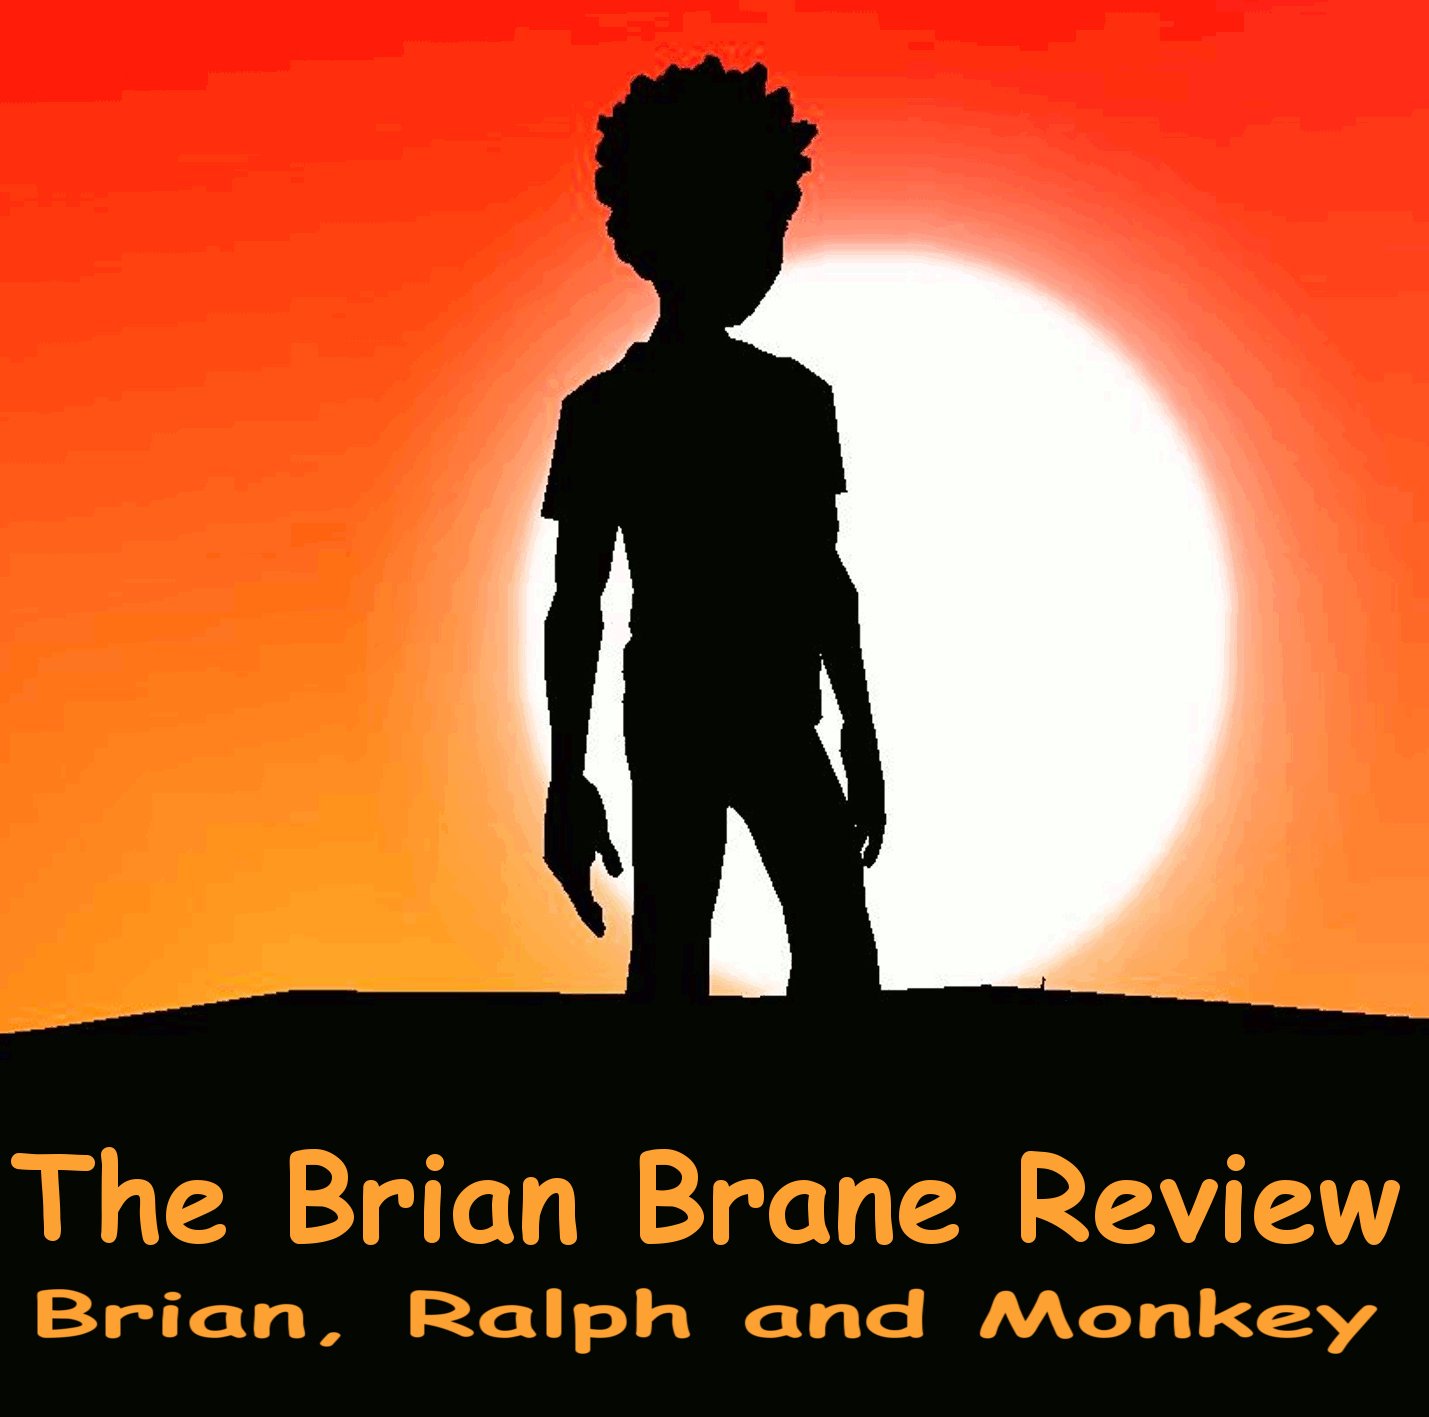 The Brian Brane Review